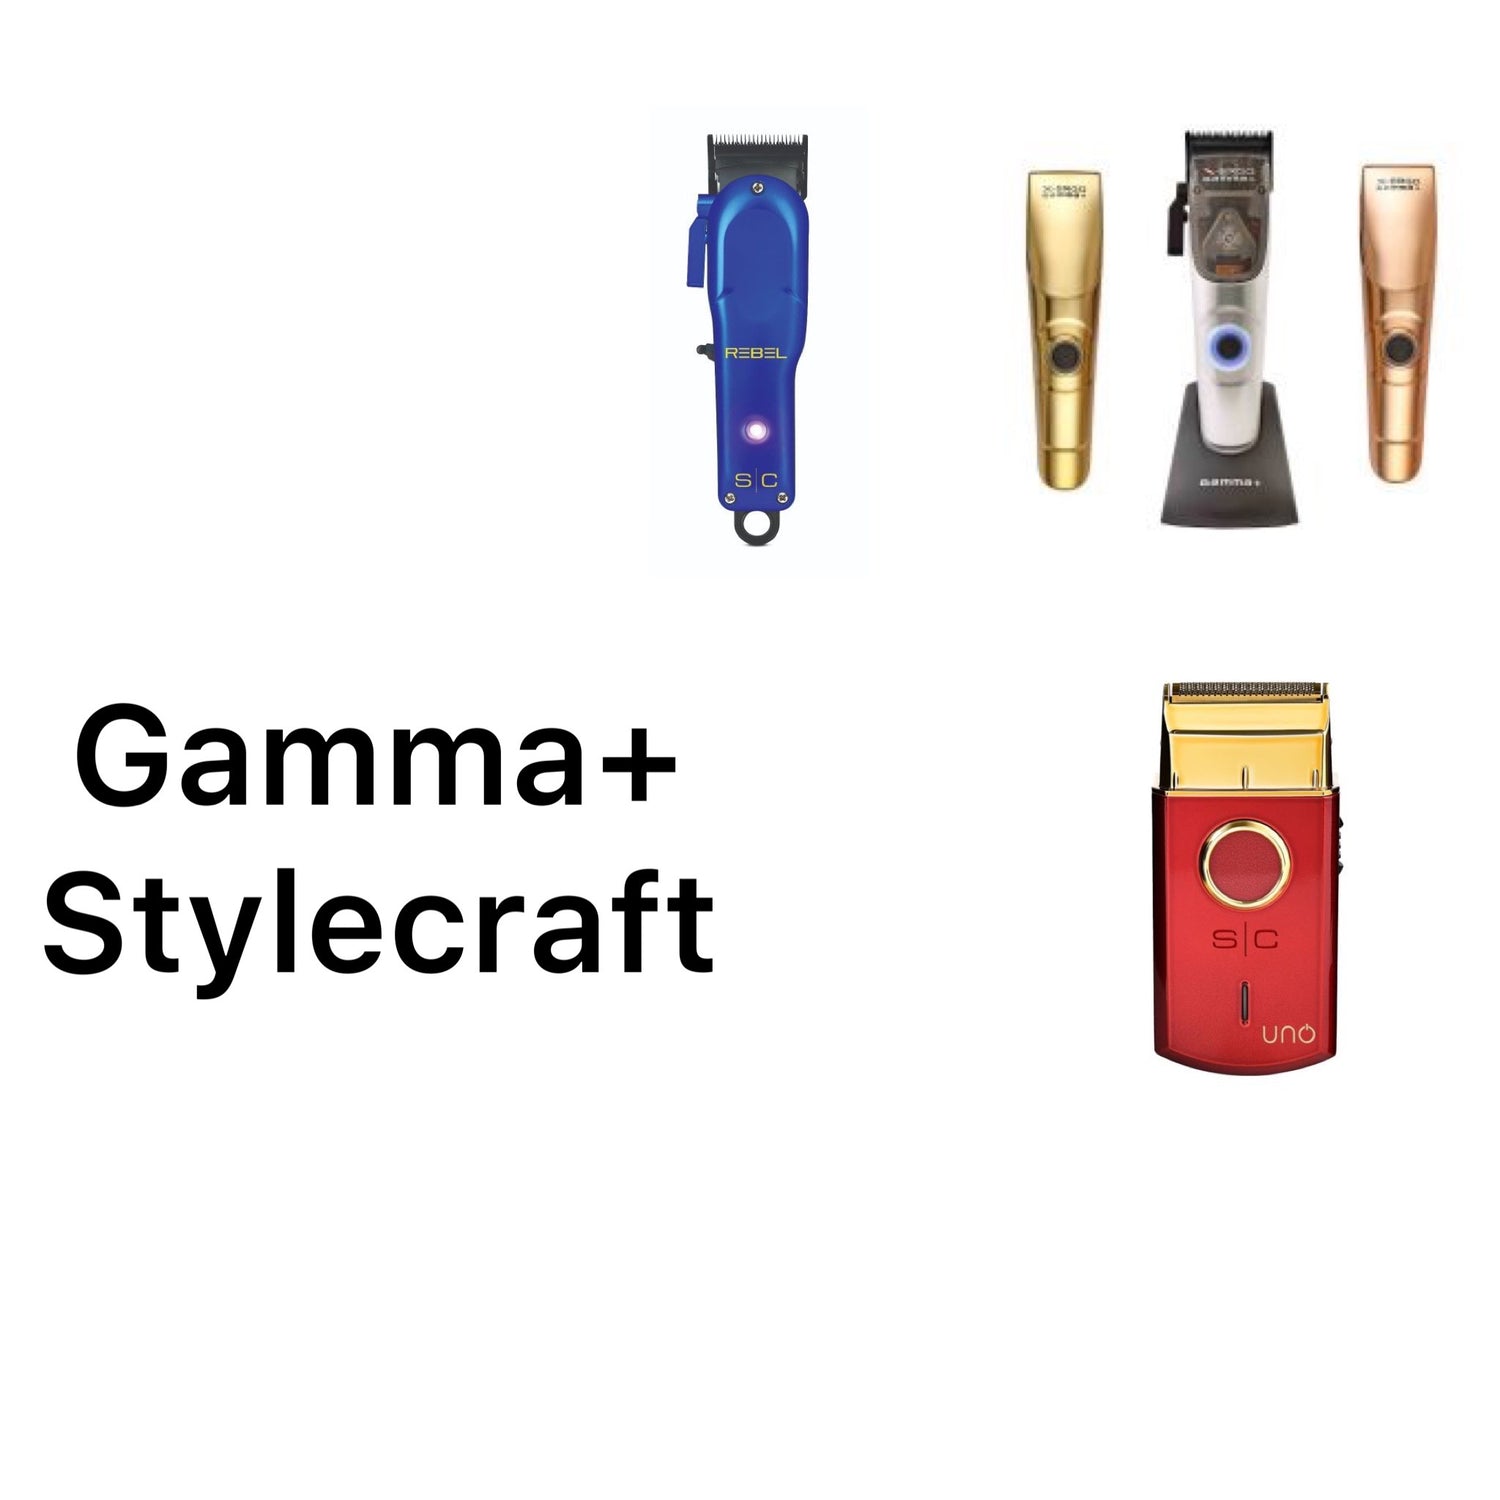 Gamma+ and Stylecraft barber and beauty products